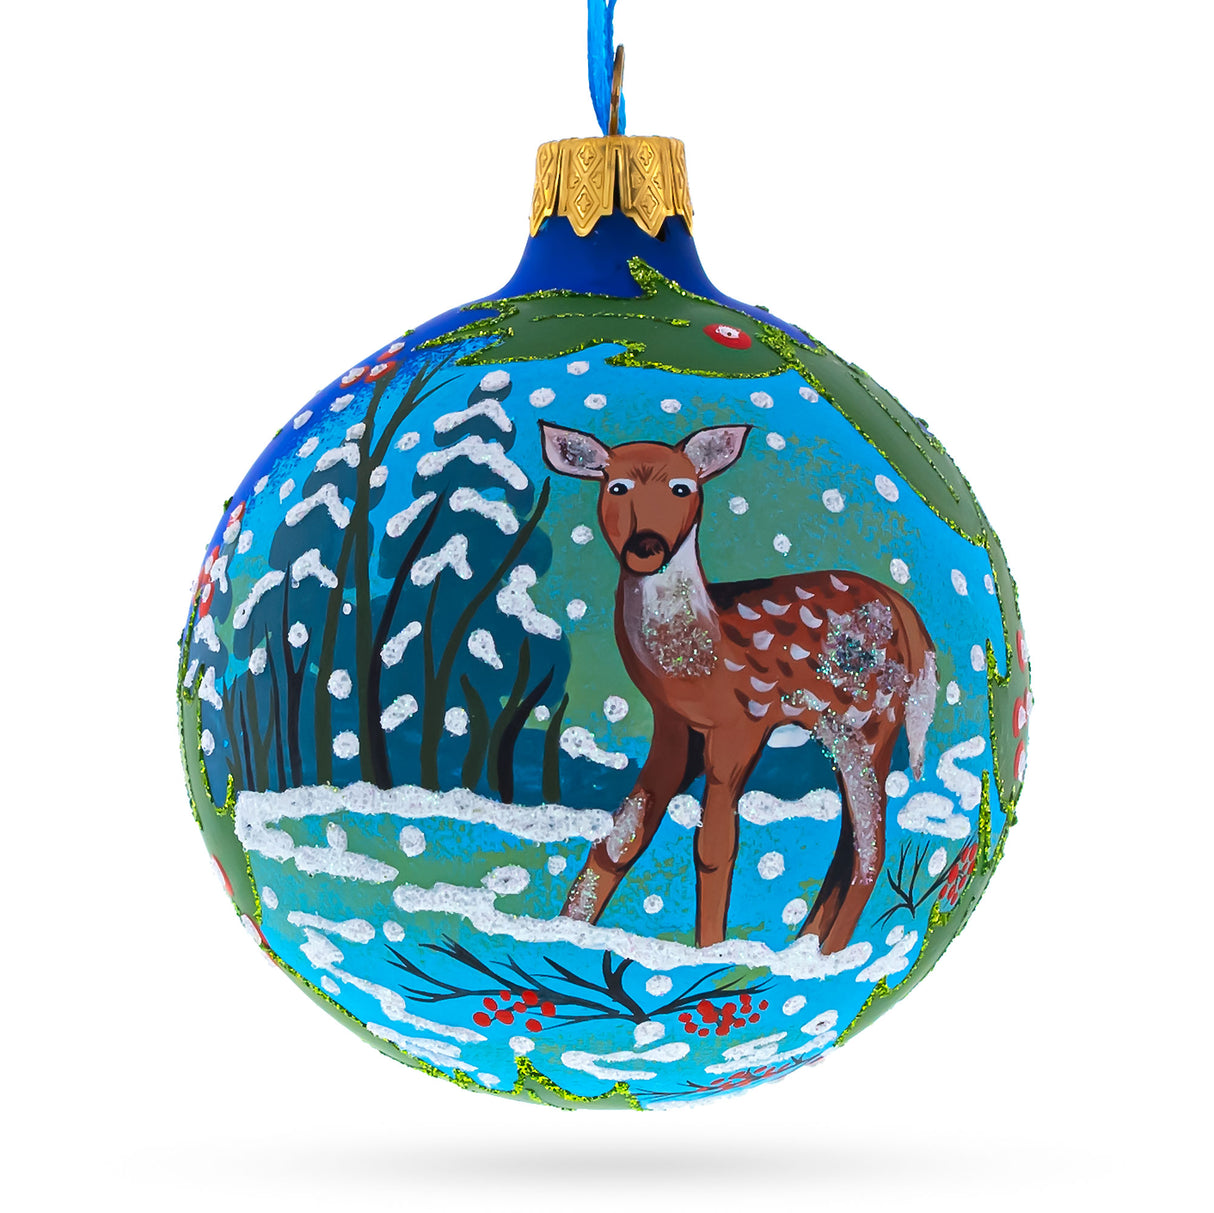 Adorable Baby Deer Blown Glass Ball Christmas Ornament 3.25 Inches in Blue color, Round shape